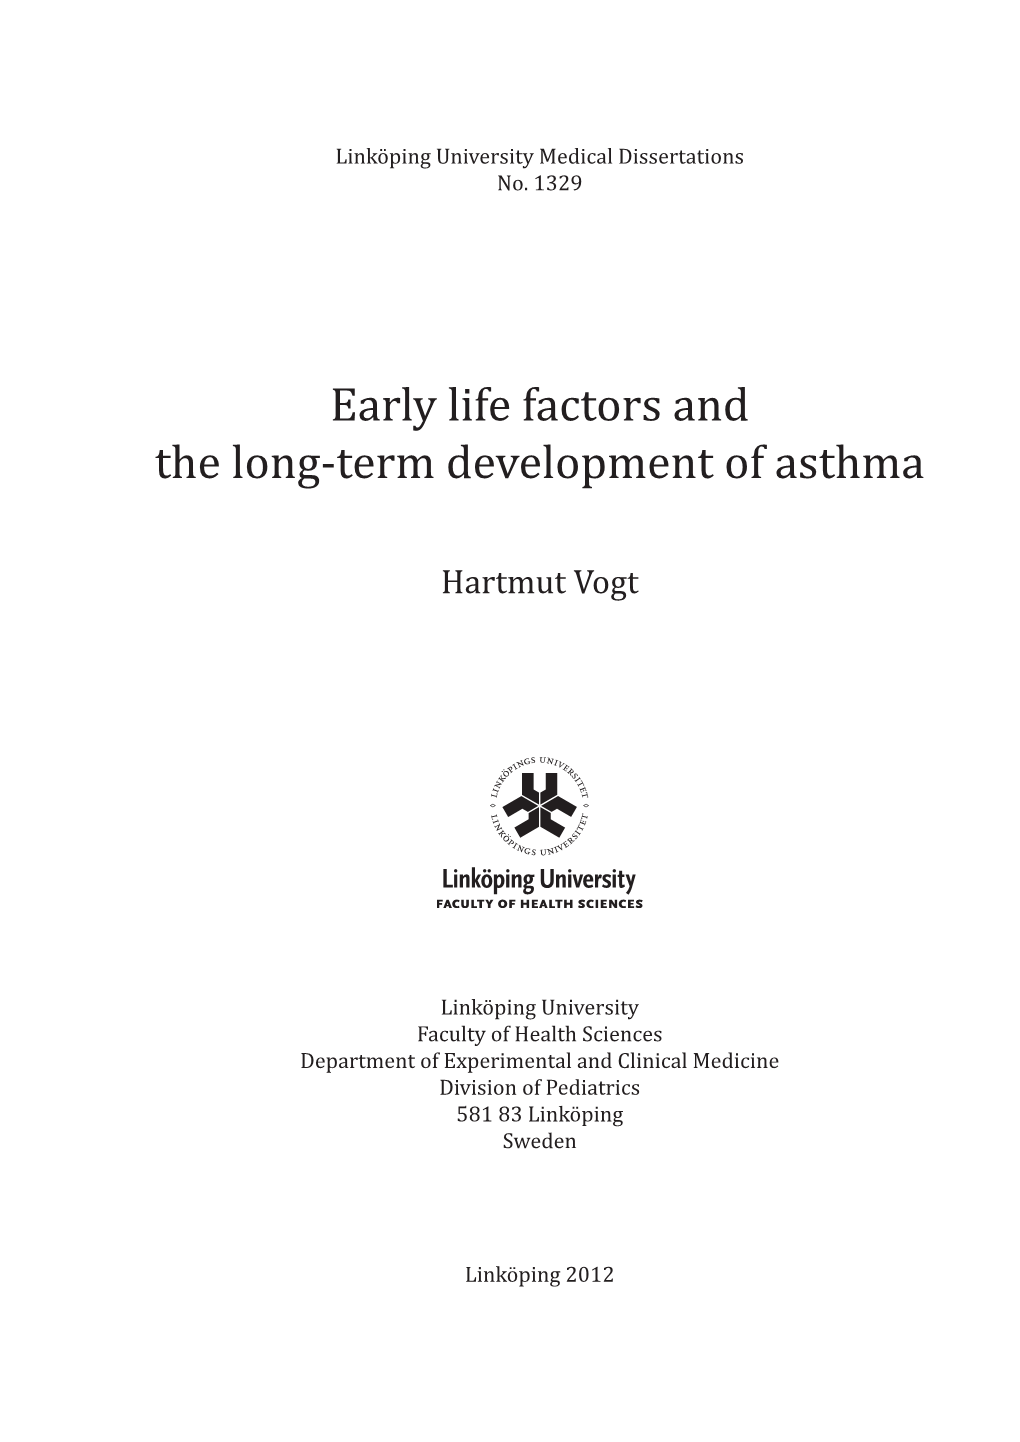 Early Life Factors and the Long-Term Development of Asthma